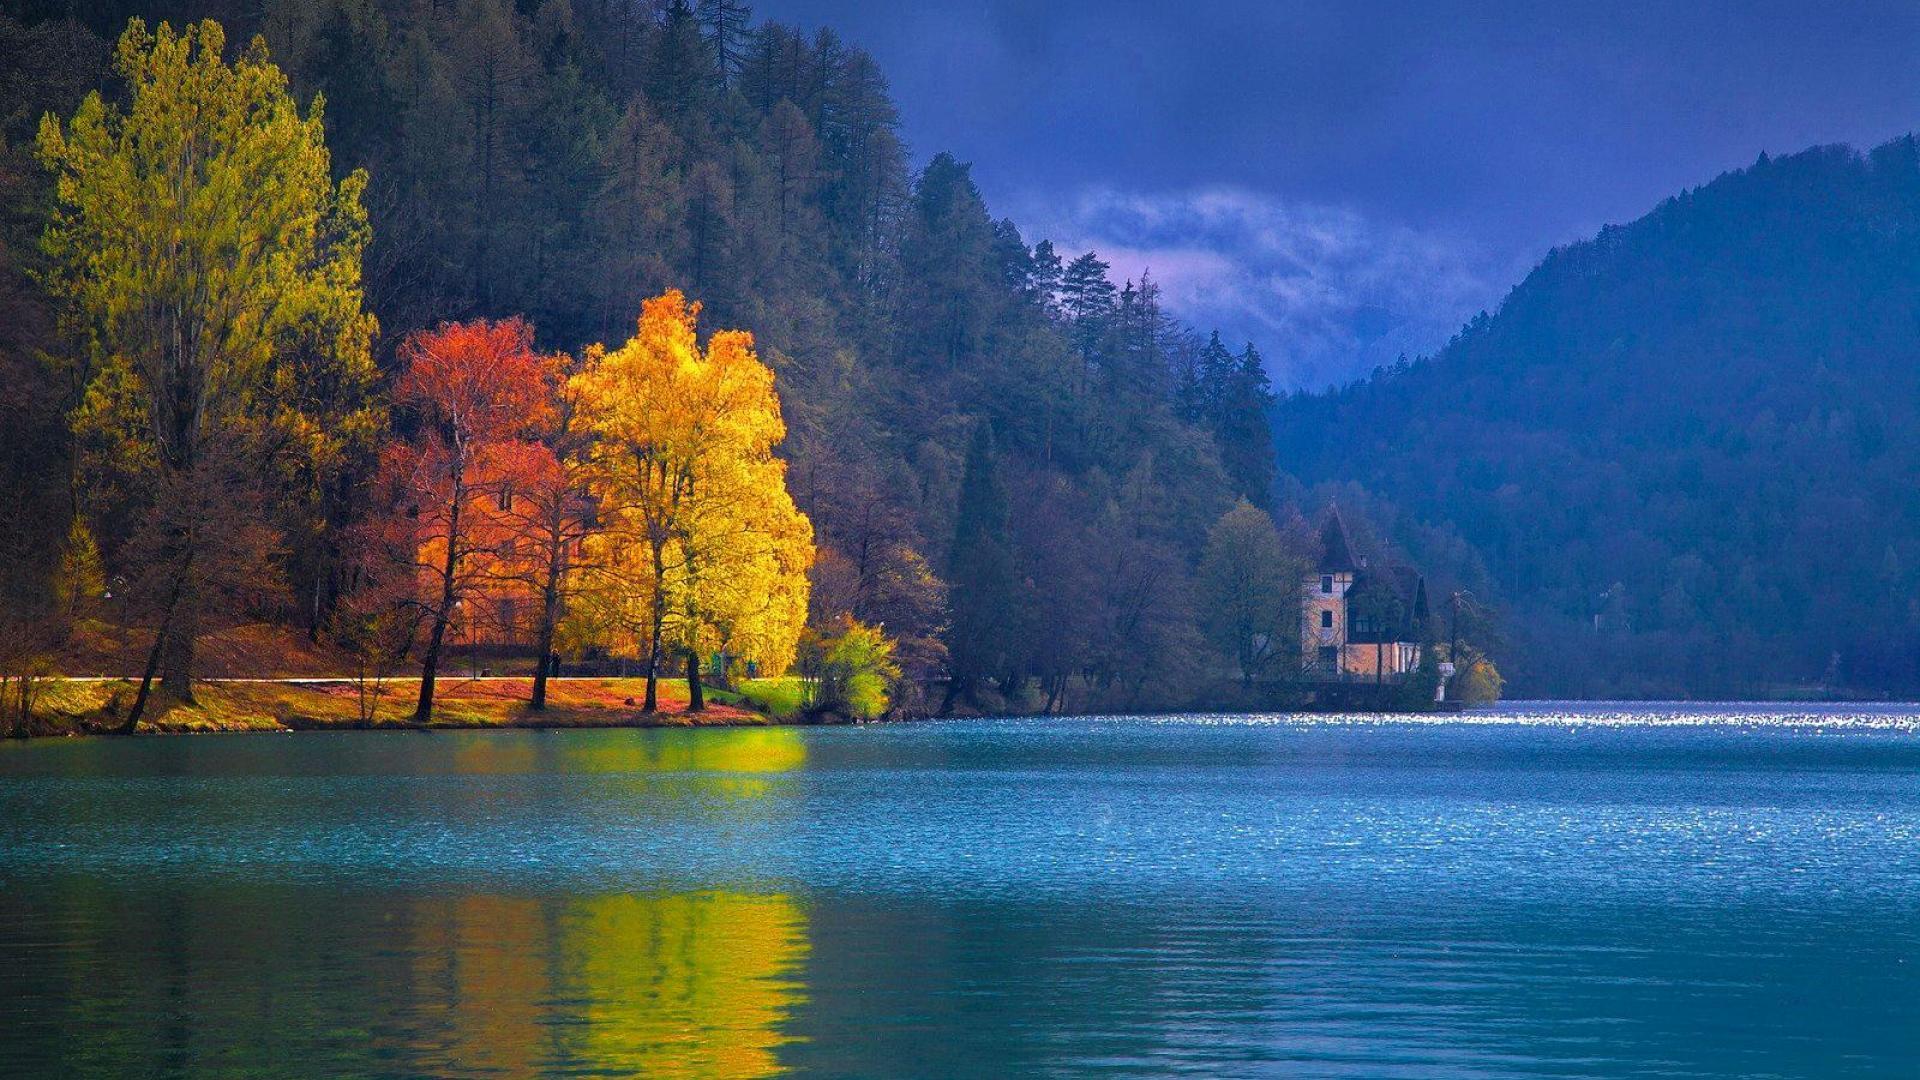 Lake bled slovenia wallpapers